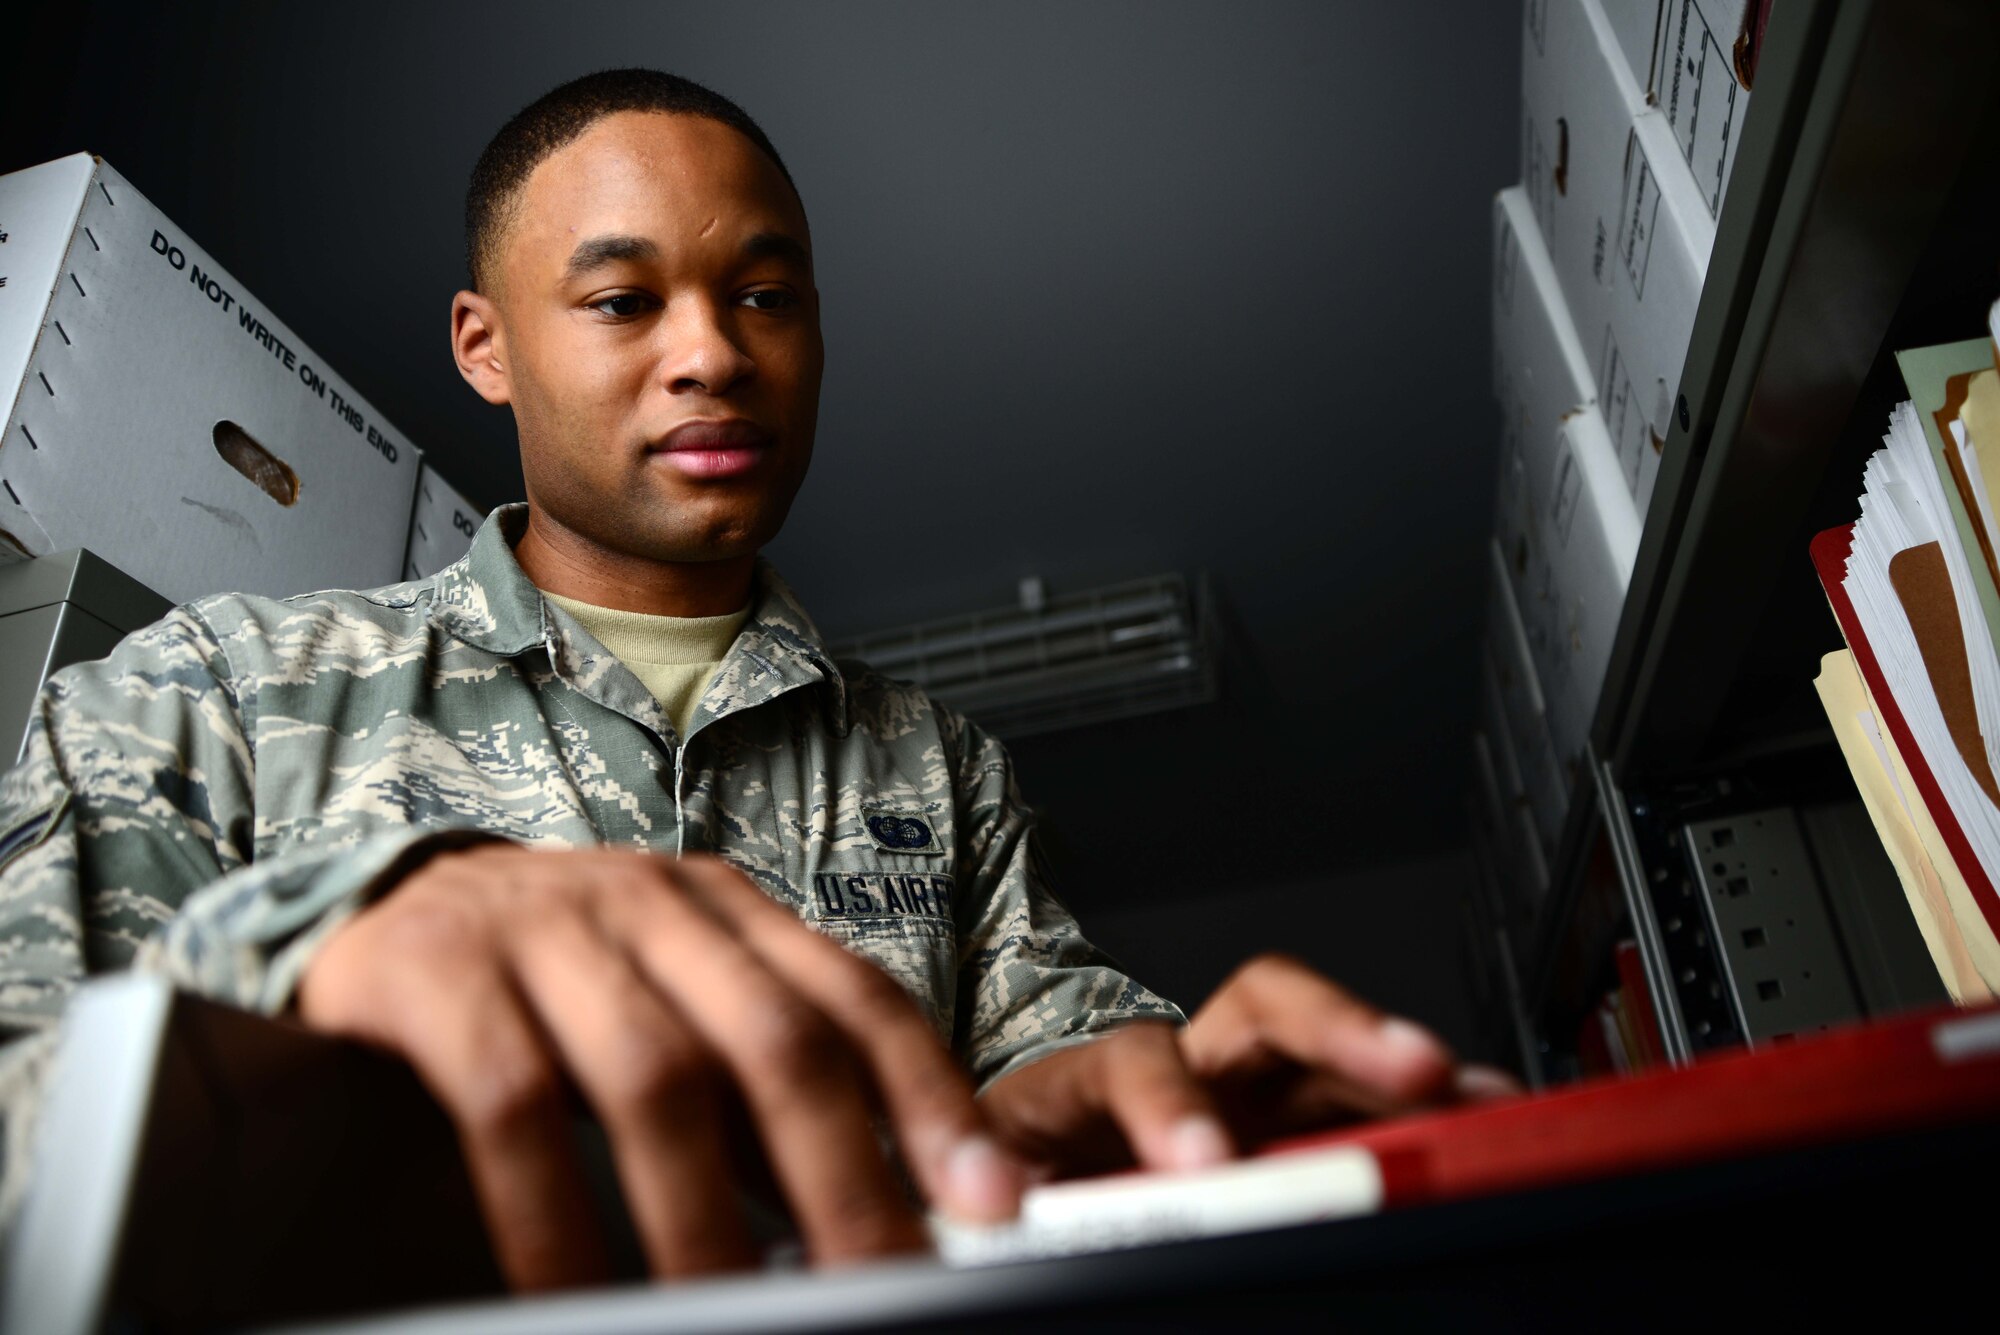 Airman 1st Class Teante Cain, 35th Contracting Squadron, searches for a customer's file July 14, 2014, at Misawa Air Base, Japan. As a contracting specialist, Cain provides acquisition support to the 35th Fighter Wing and its tenant units. Cain was named the 35th FW's Wild Weasel of the Week. (U.S. Air Force photo/Senior Airman Derek VanHorn)